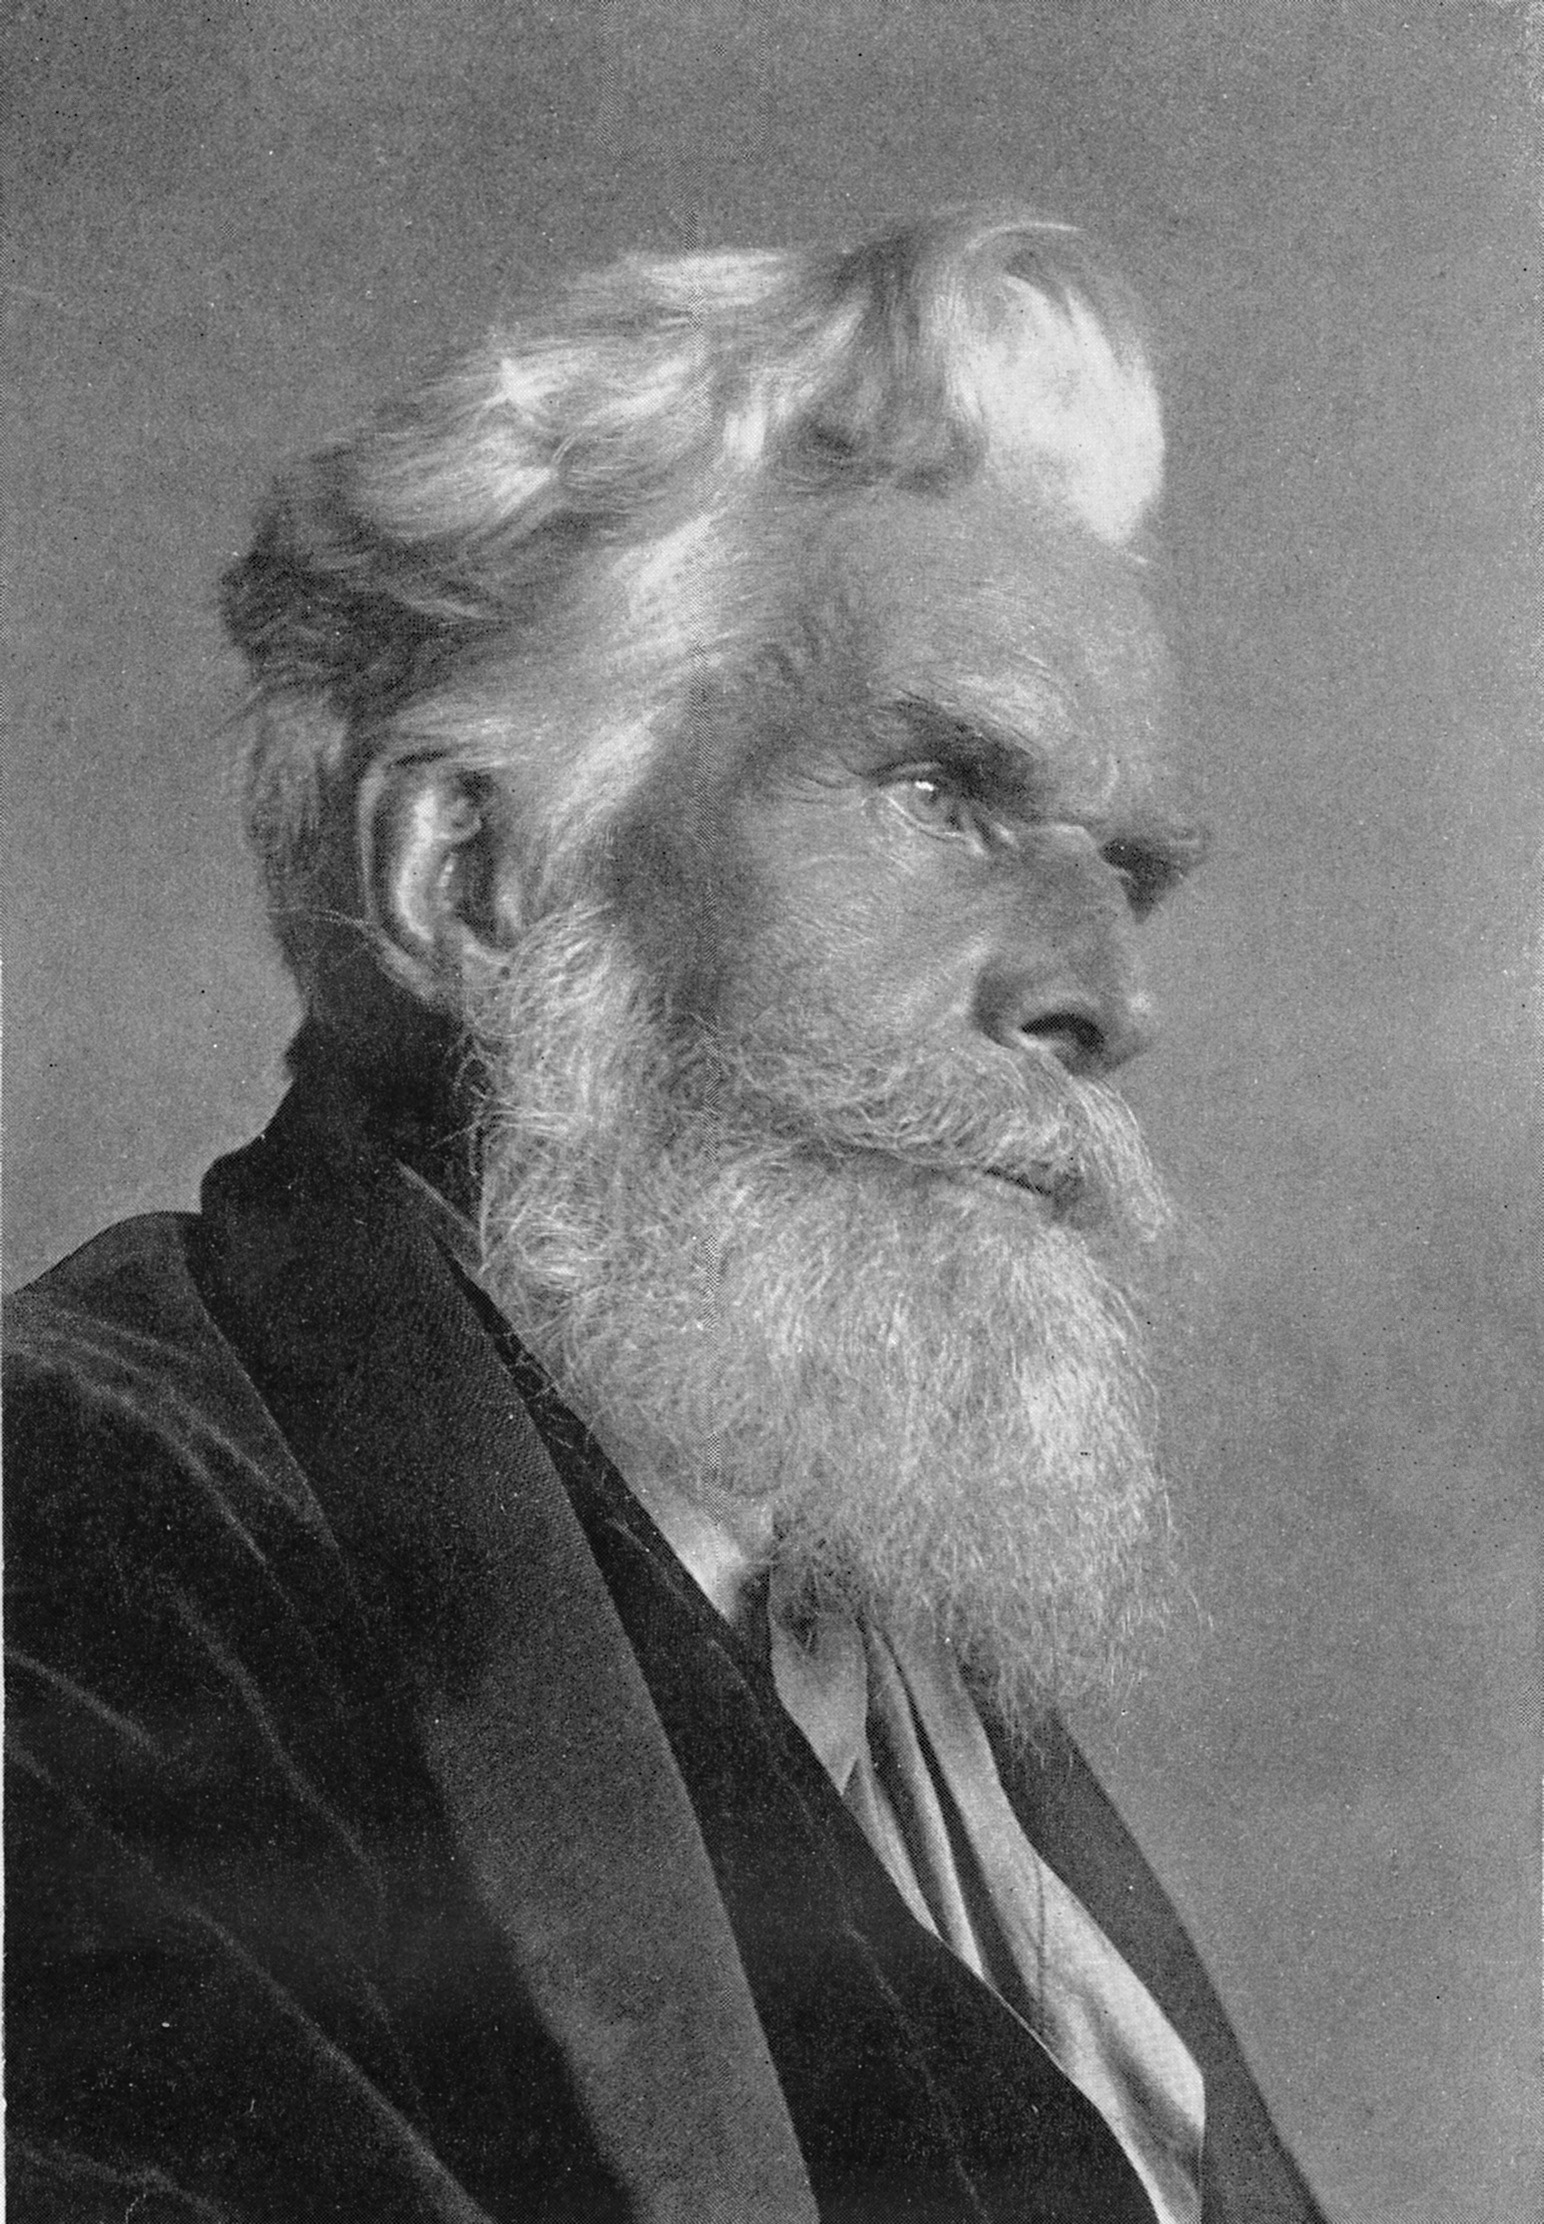 Old photograph of a man in a suit with a long beard.